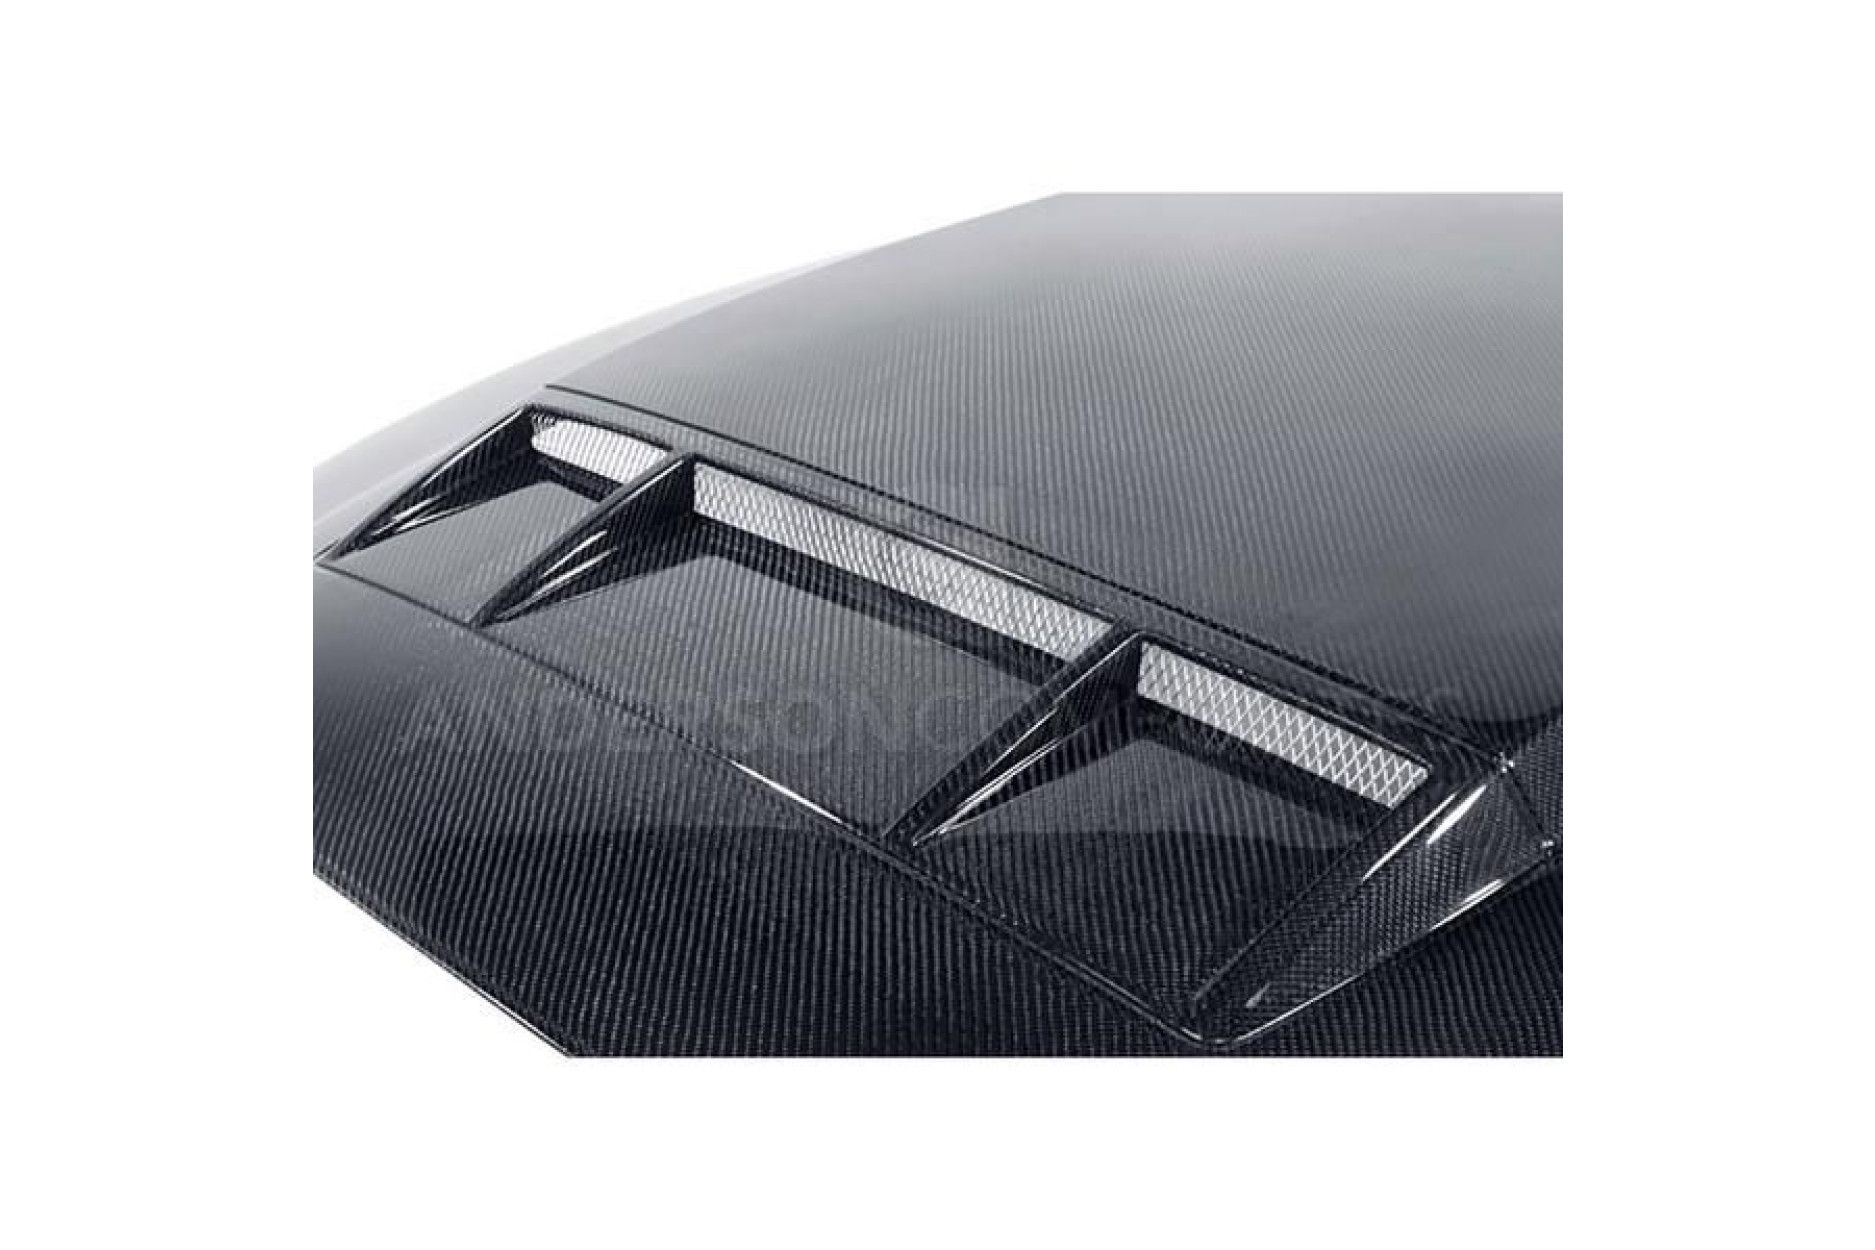 Anderson Composites Ram air type-CR carbon fiber hood for 2010-2014 Ford Mustang GT500 and 2013-2014 Mustang GT/V6 (3) 